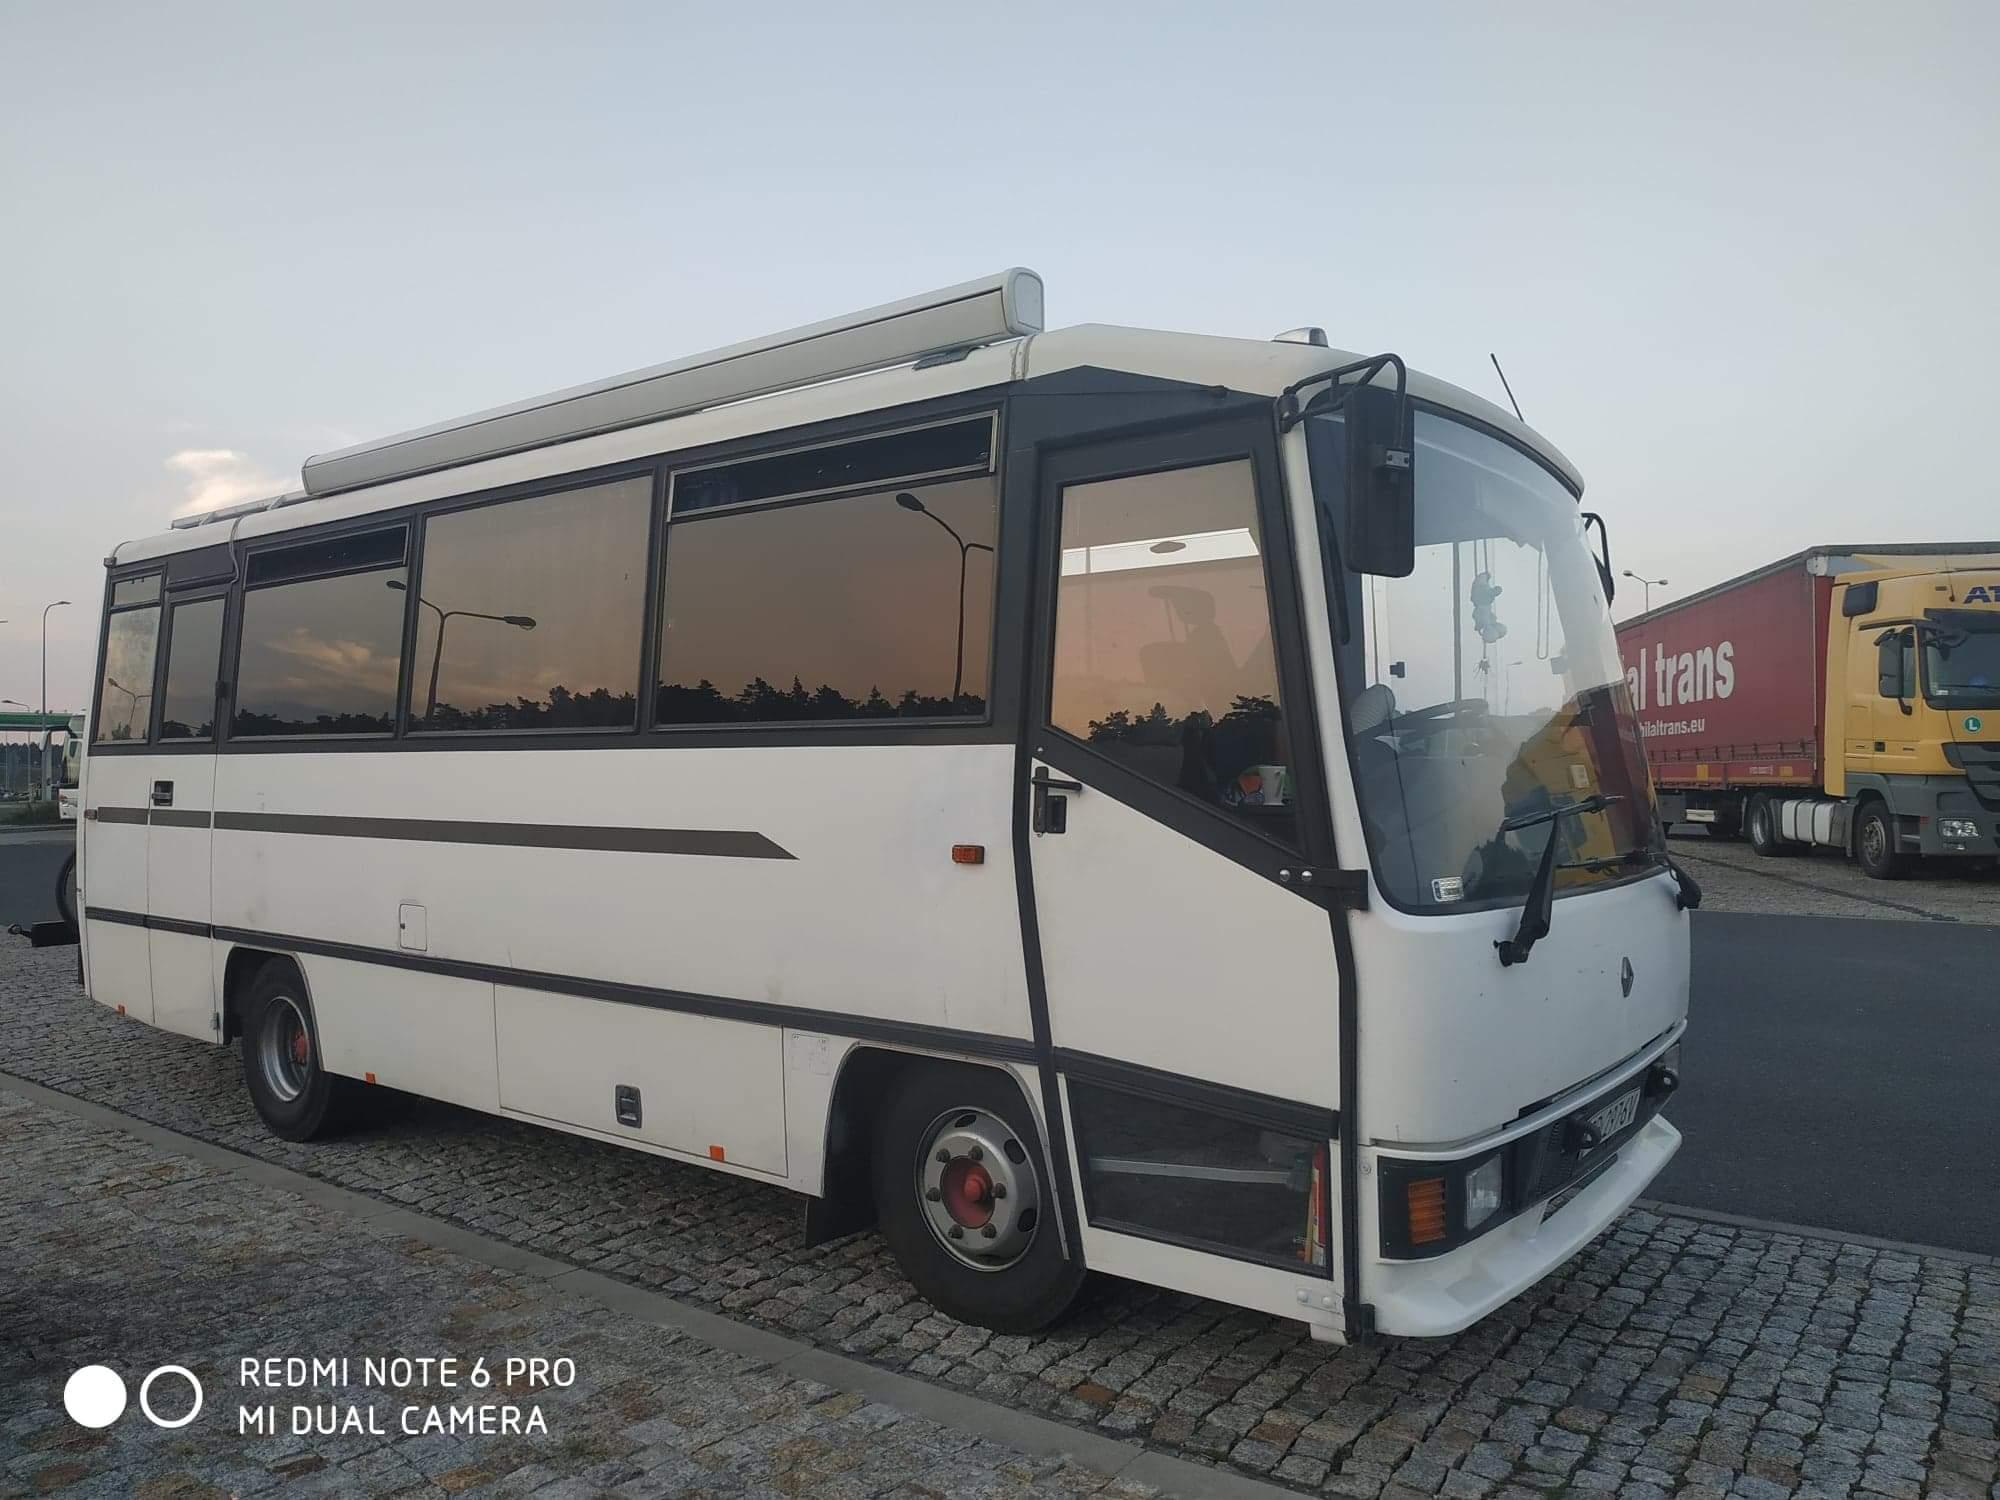 Load capacity without compromise, that is ... a bus as a motorhome – image 4